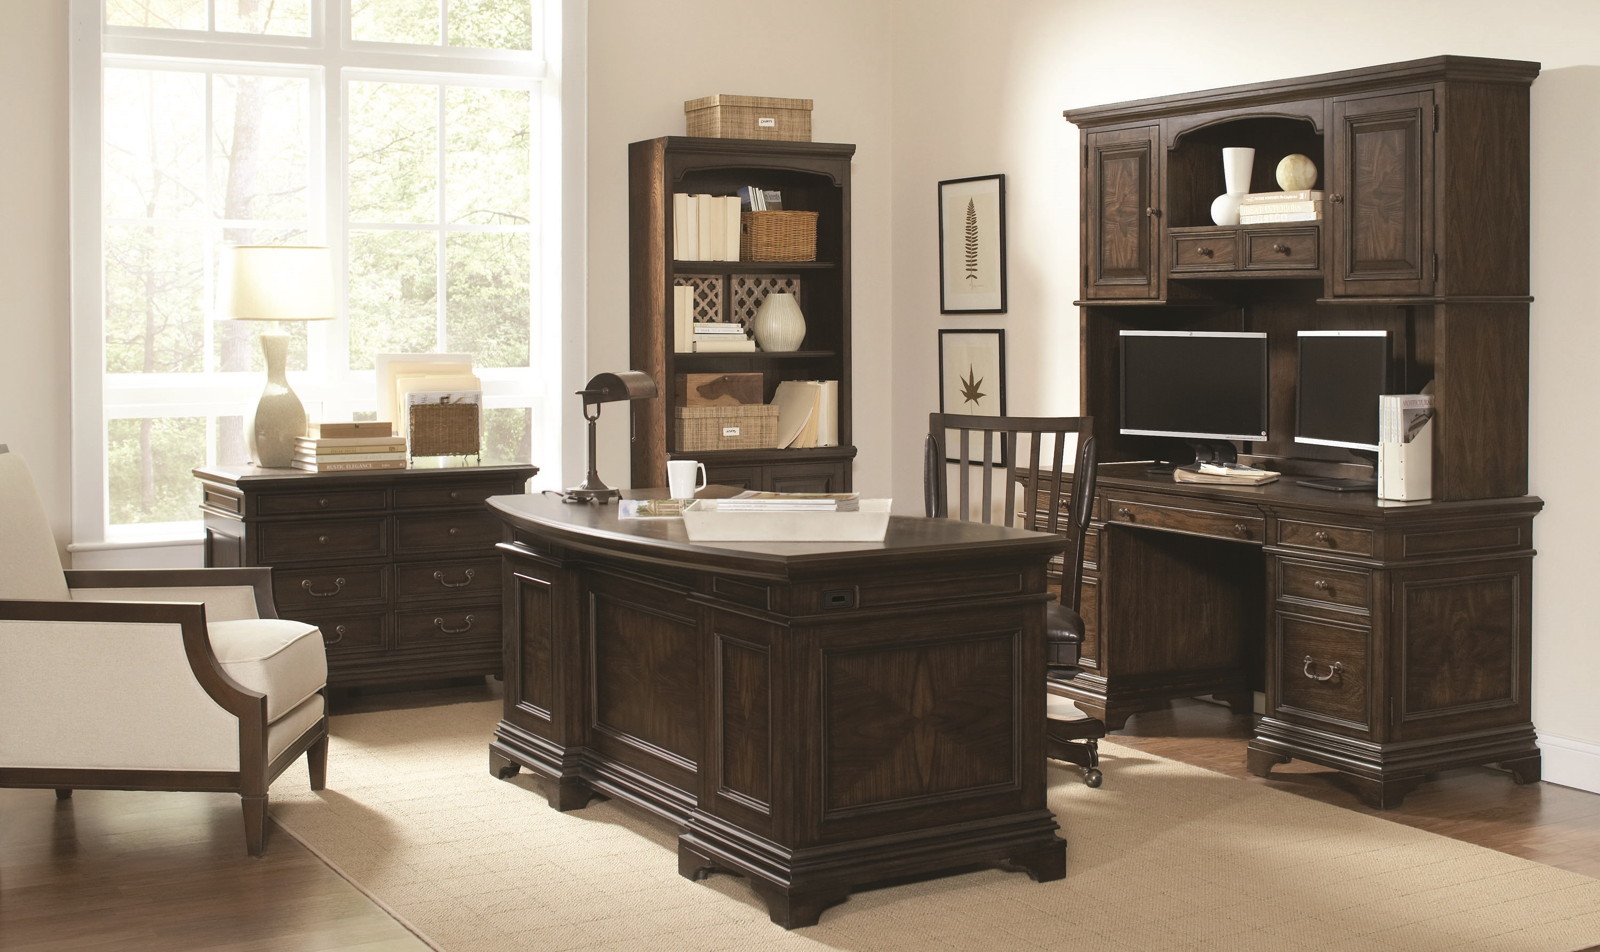 Aspenhome Essex Curved Executive Desk Home Office Set In Molasses